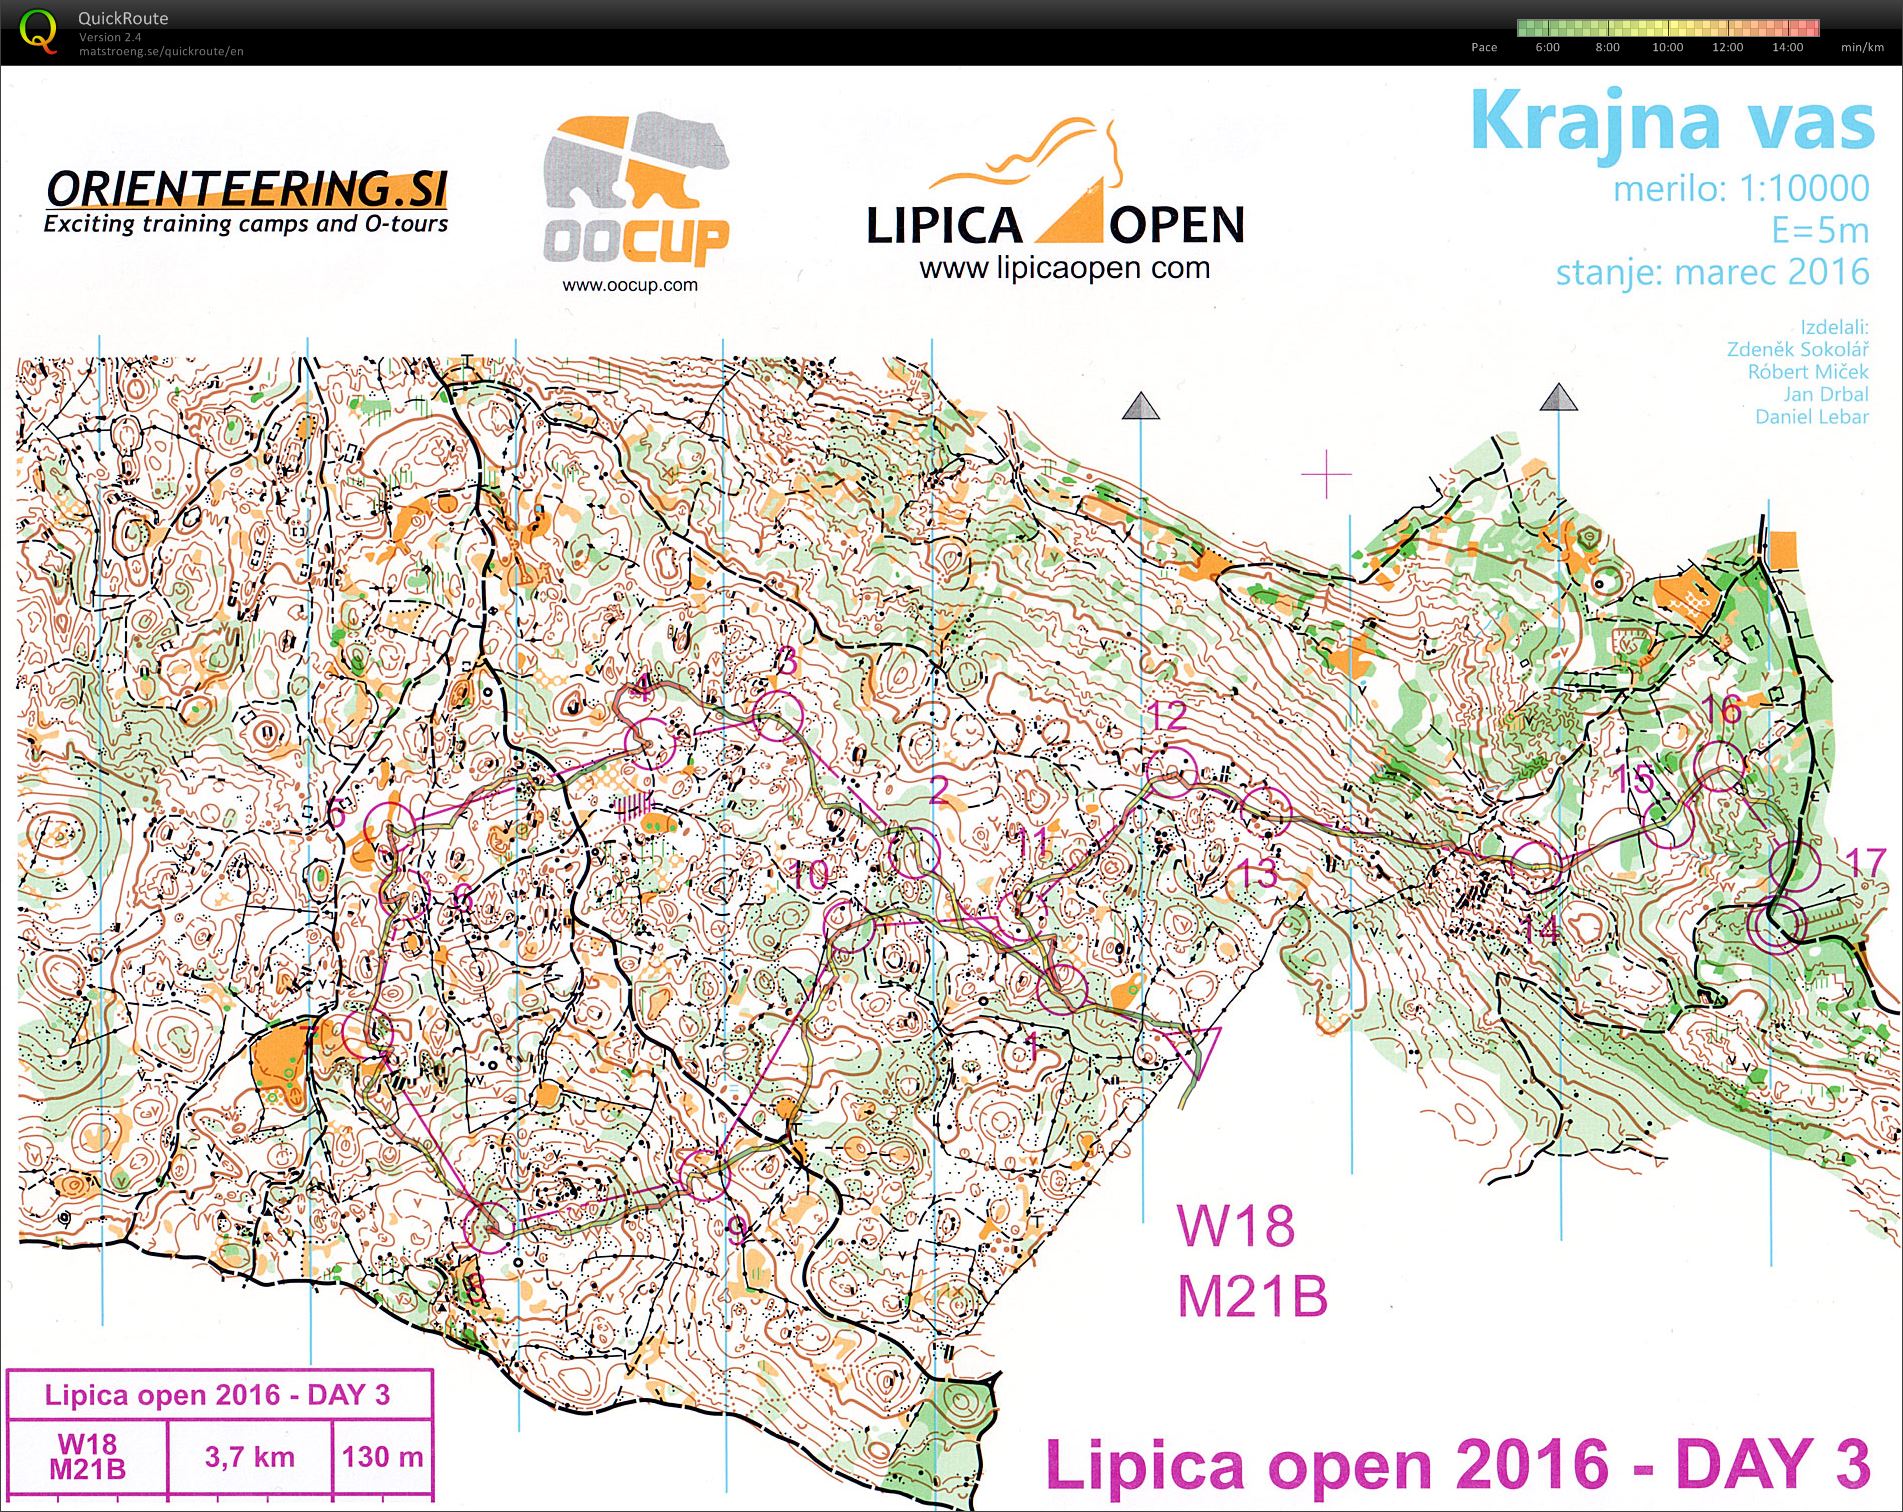 Lipica Open 2016 Day 3 (14-03-2016)